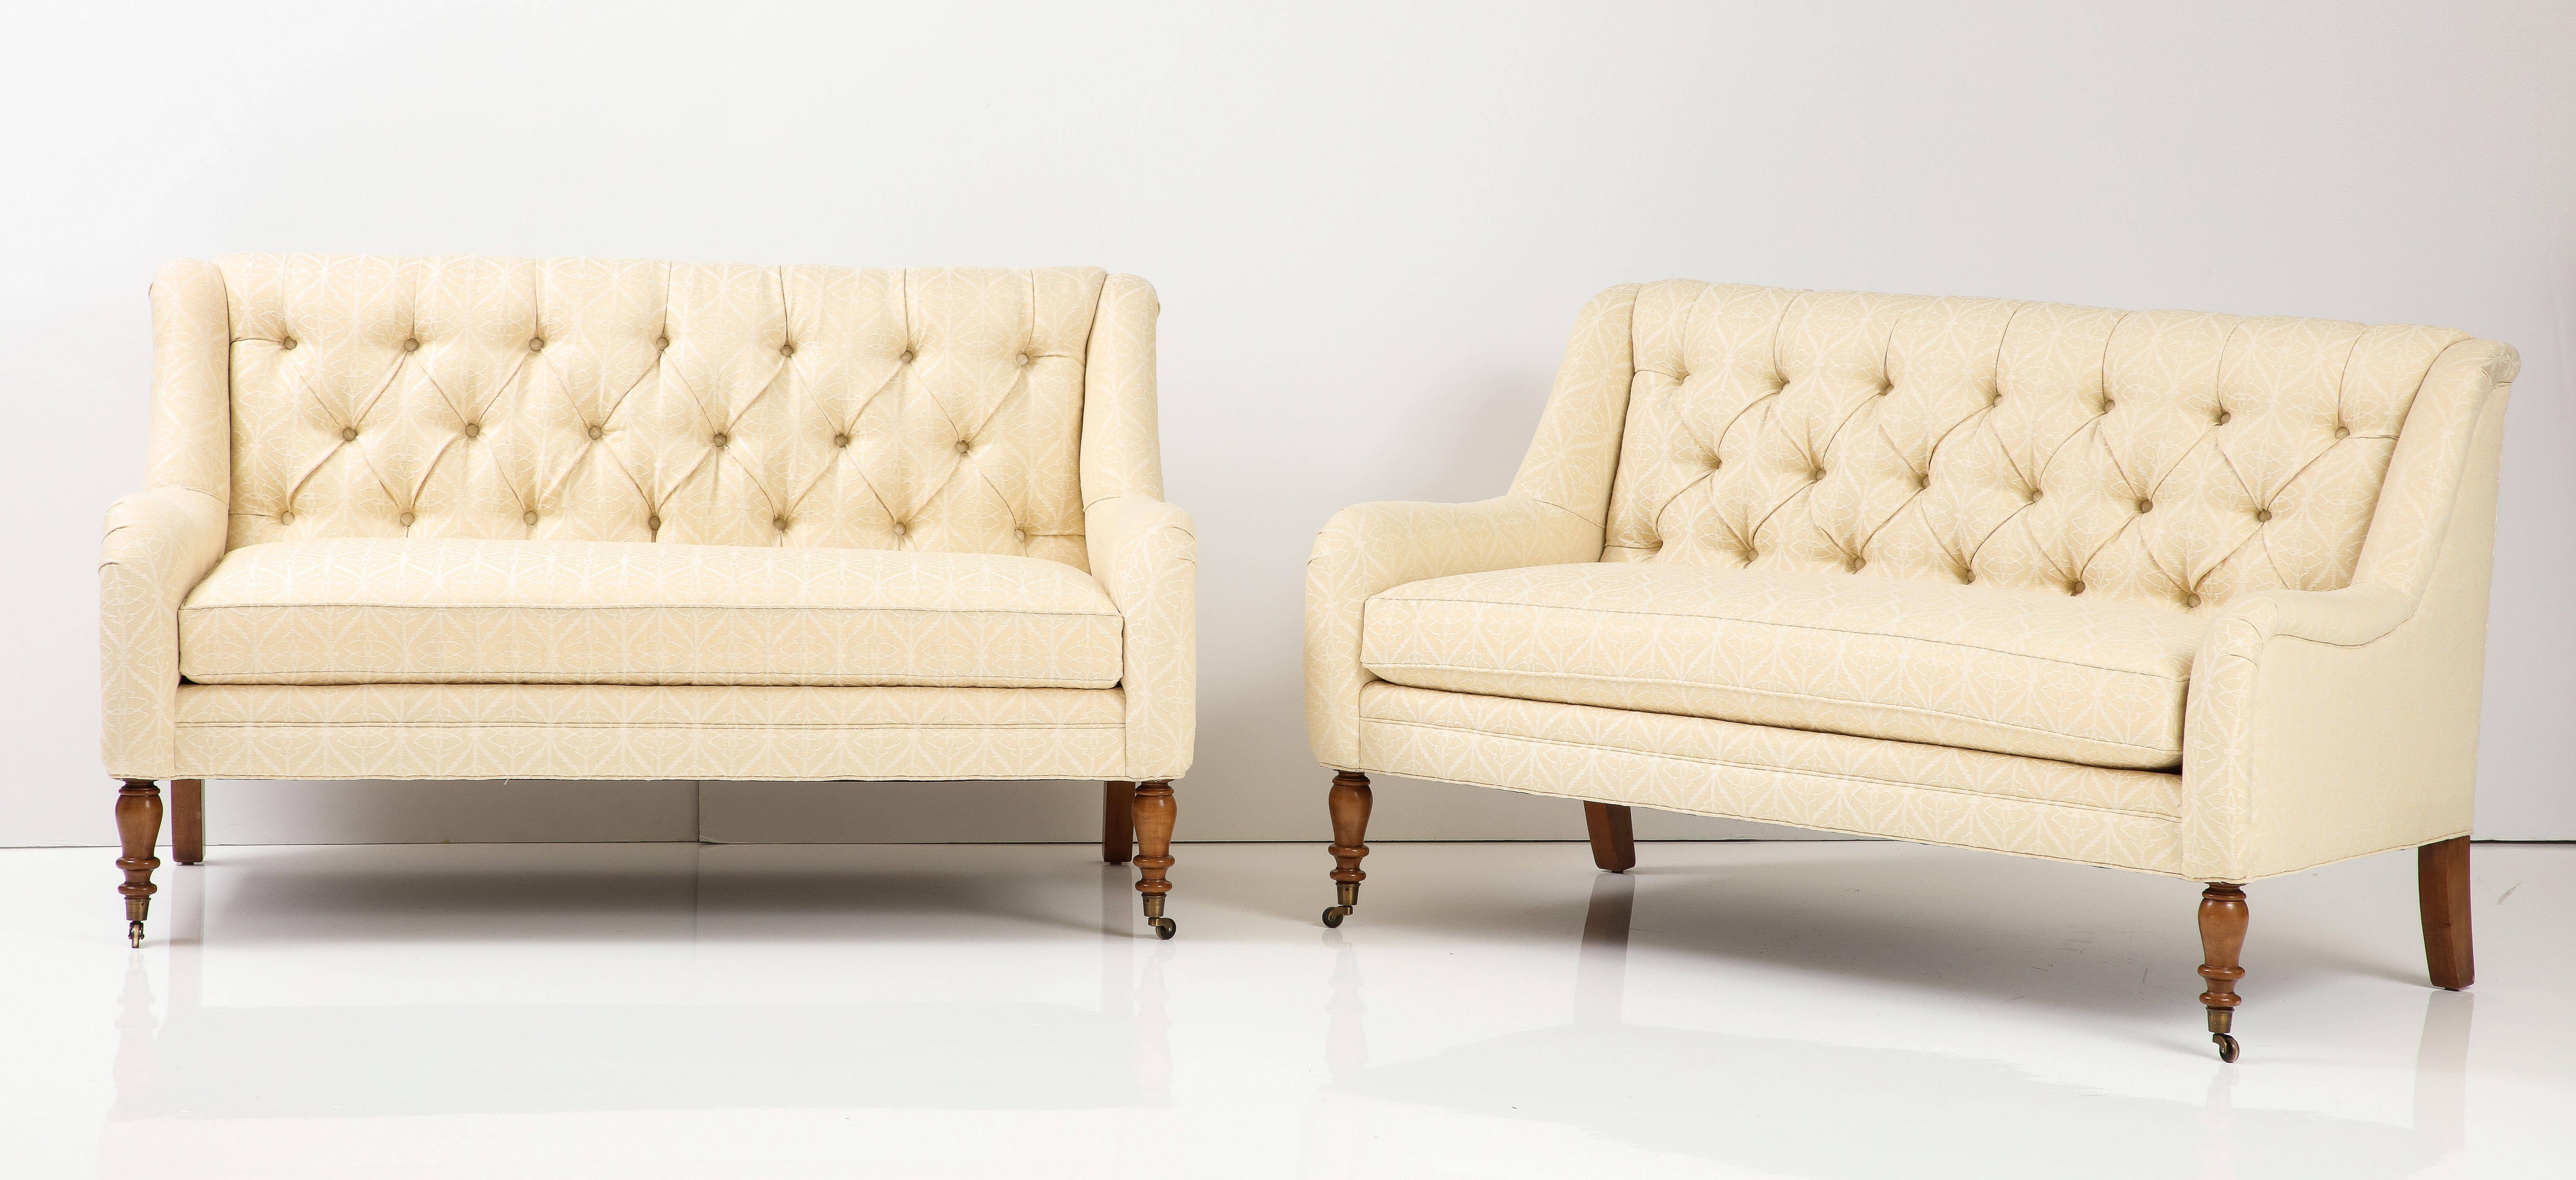 The clean lines of these two love seats make them quite versatile--they would be perfect in an entry, flanking a fireplace or as seating at a dining table. Featuring a tufted back and a loos seat cushion, the loveseats have rounded arms and turned